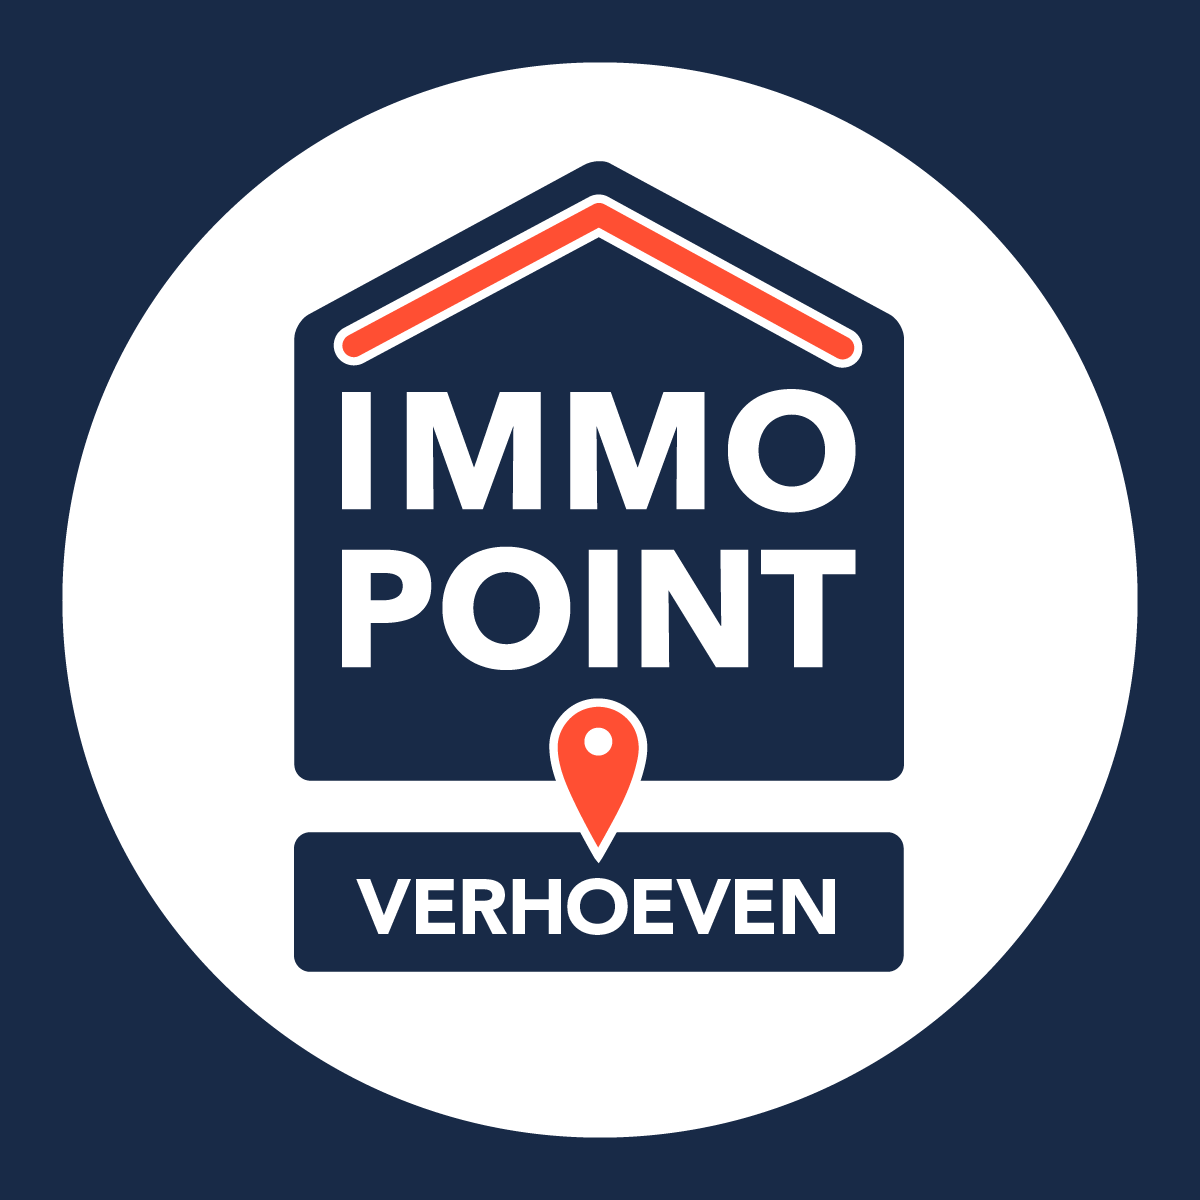 IMMO POINT VERHOEVEN